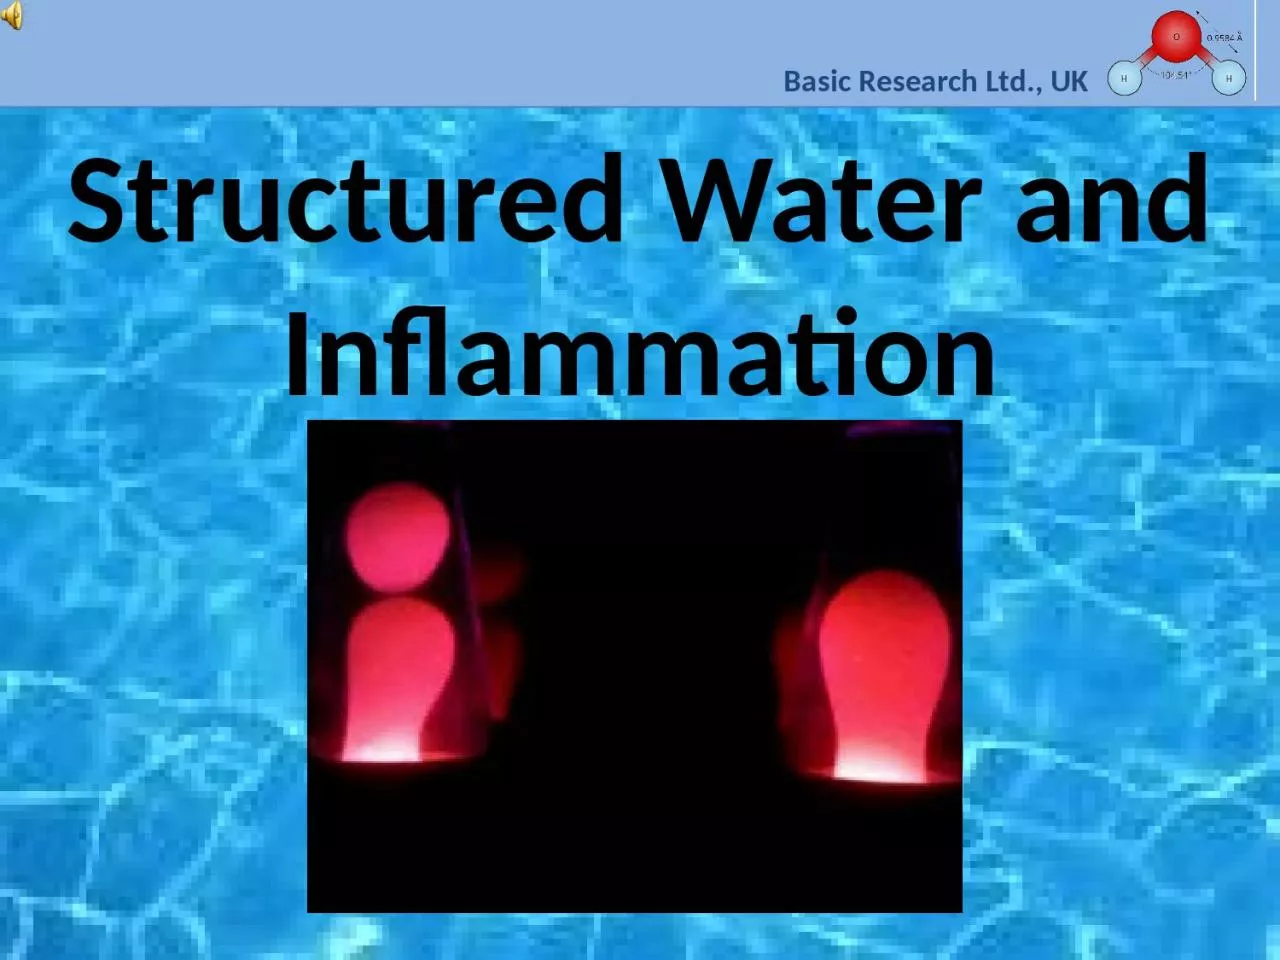 Structured Water and Inflammation